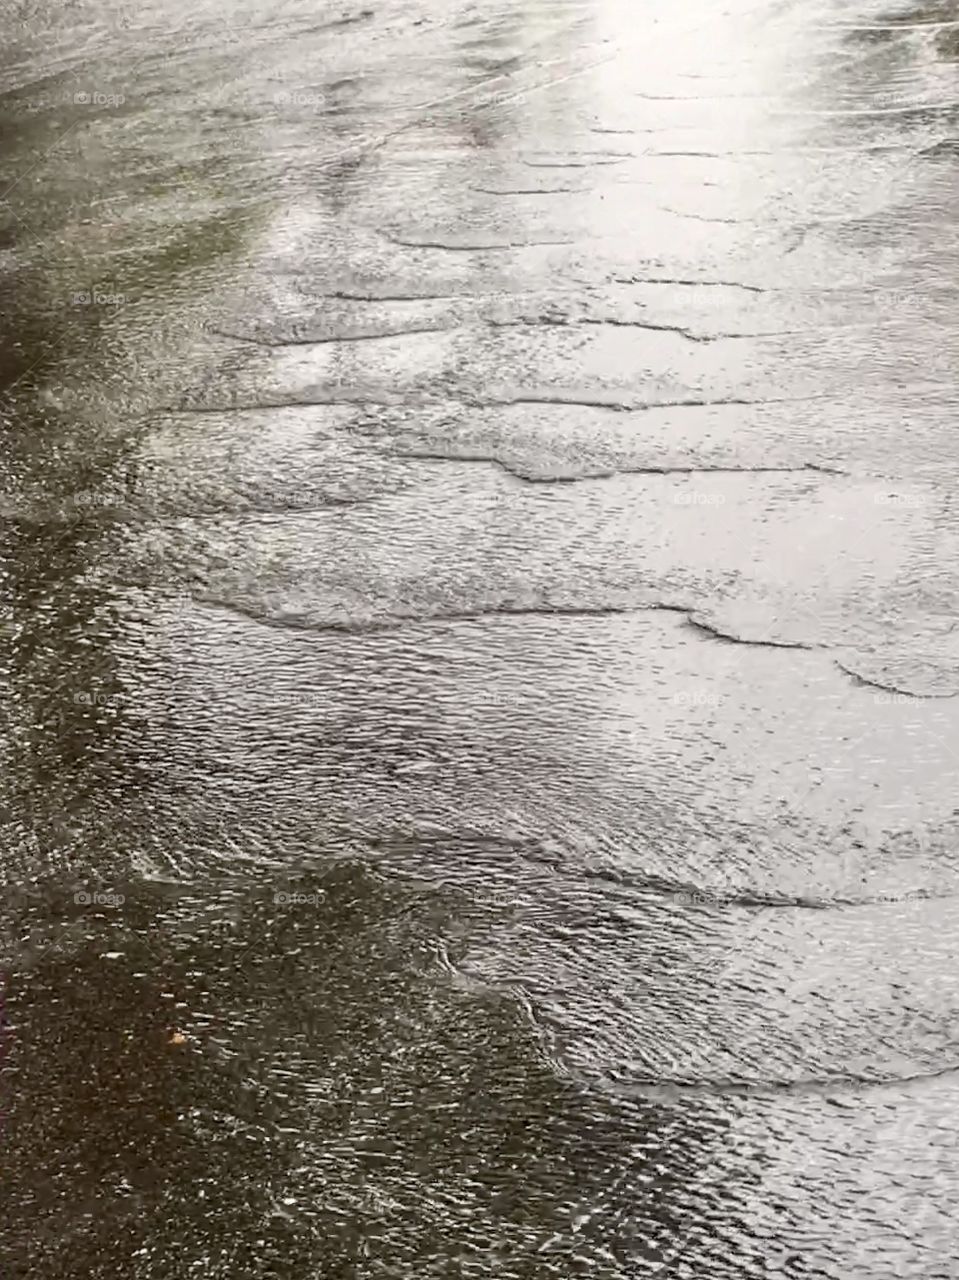 Water flowing after rain